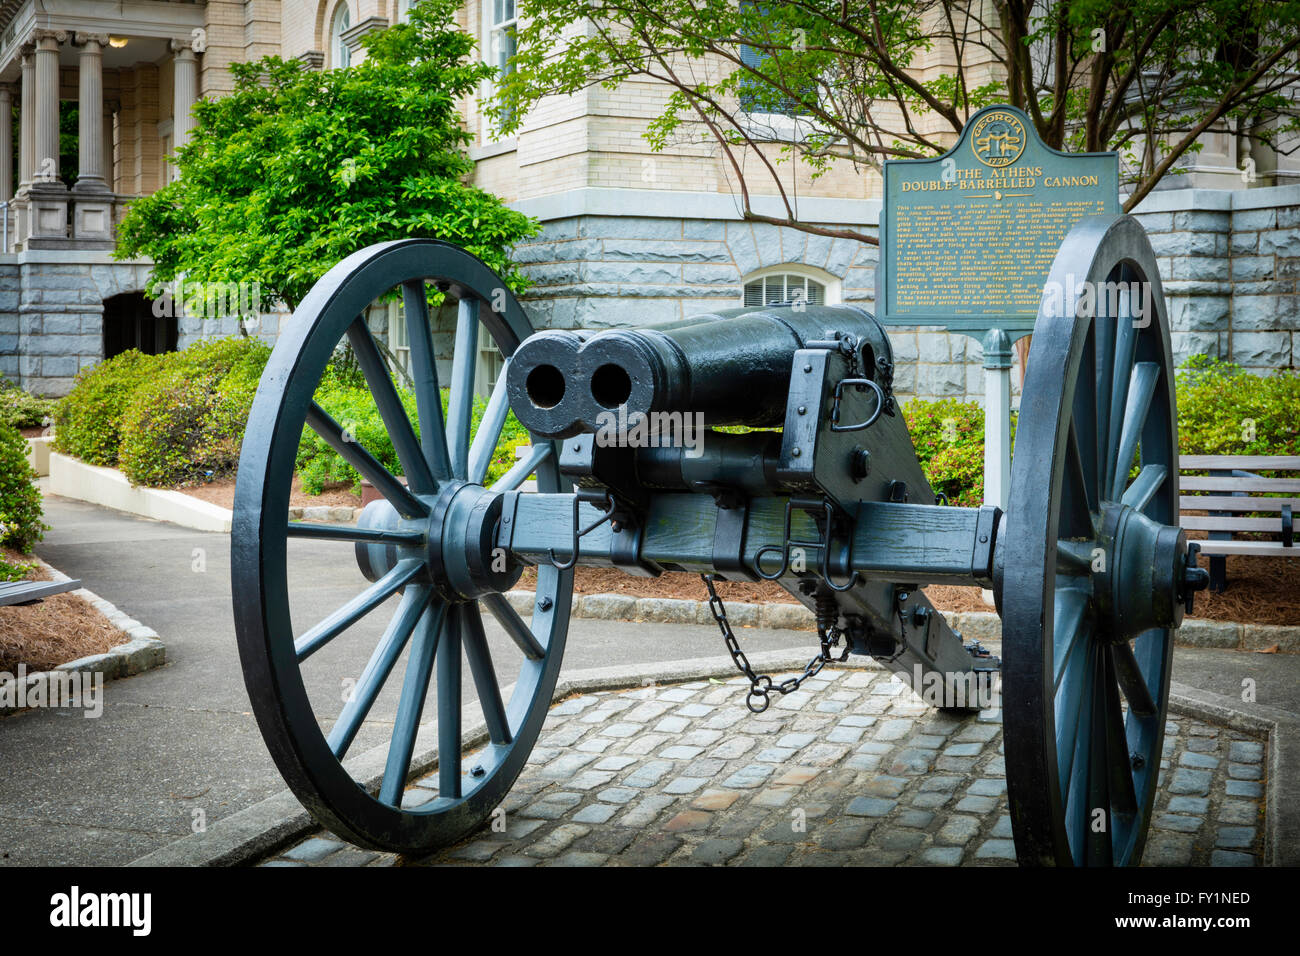 Infamous double-barreled Cannon - that never worked as planned, Athens, Georgia, USA Stock Photo